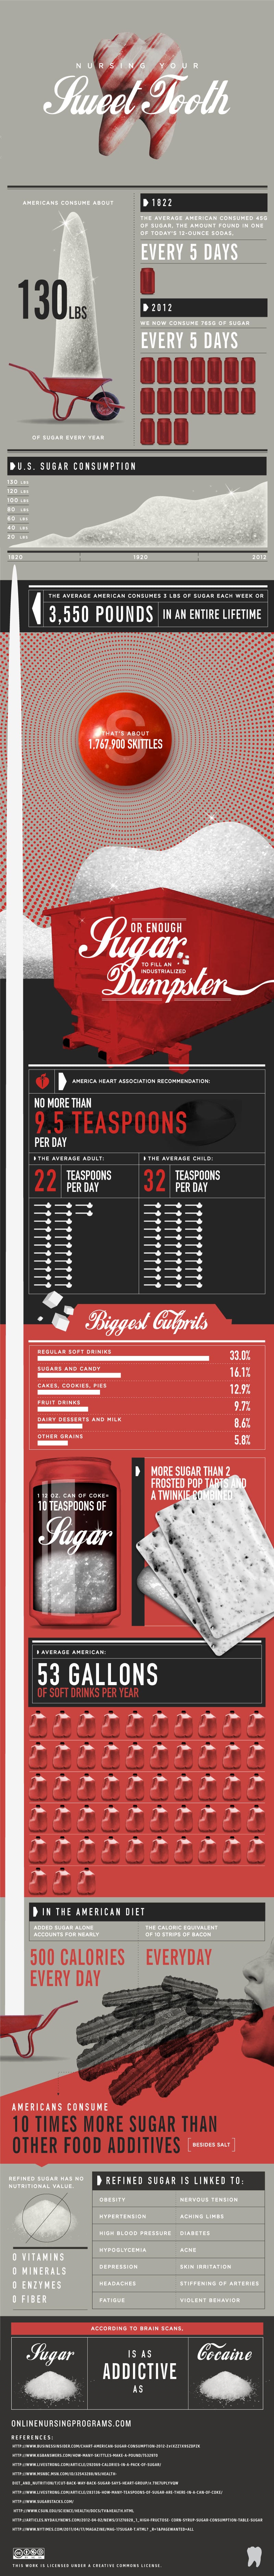 Sugar Consumption Facts & How Addicting It Really Is [Infographic]